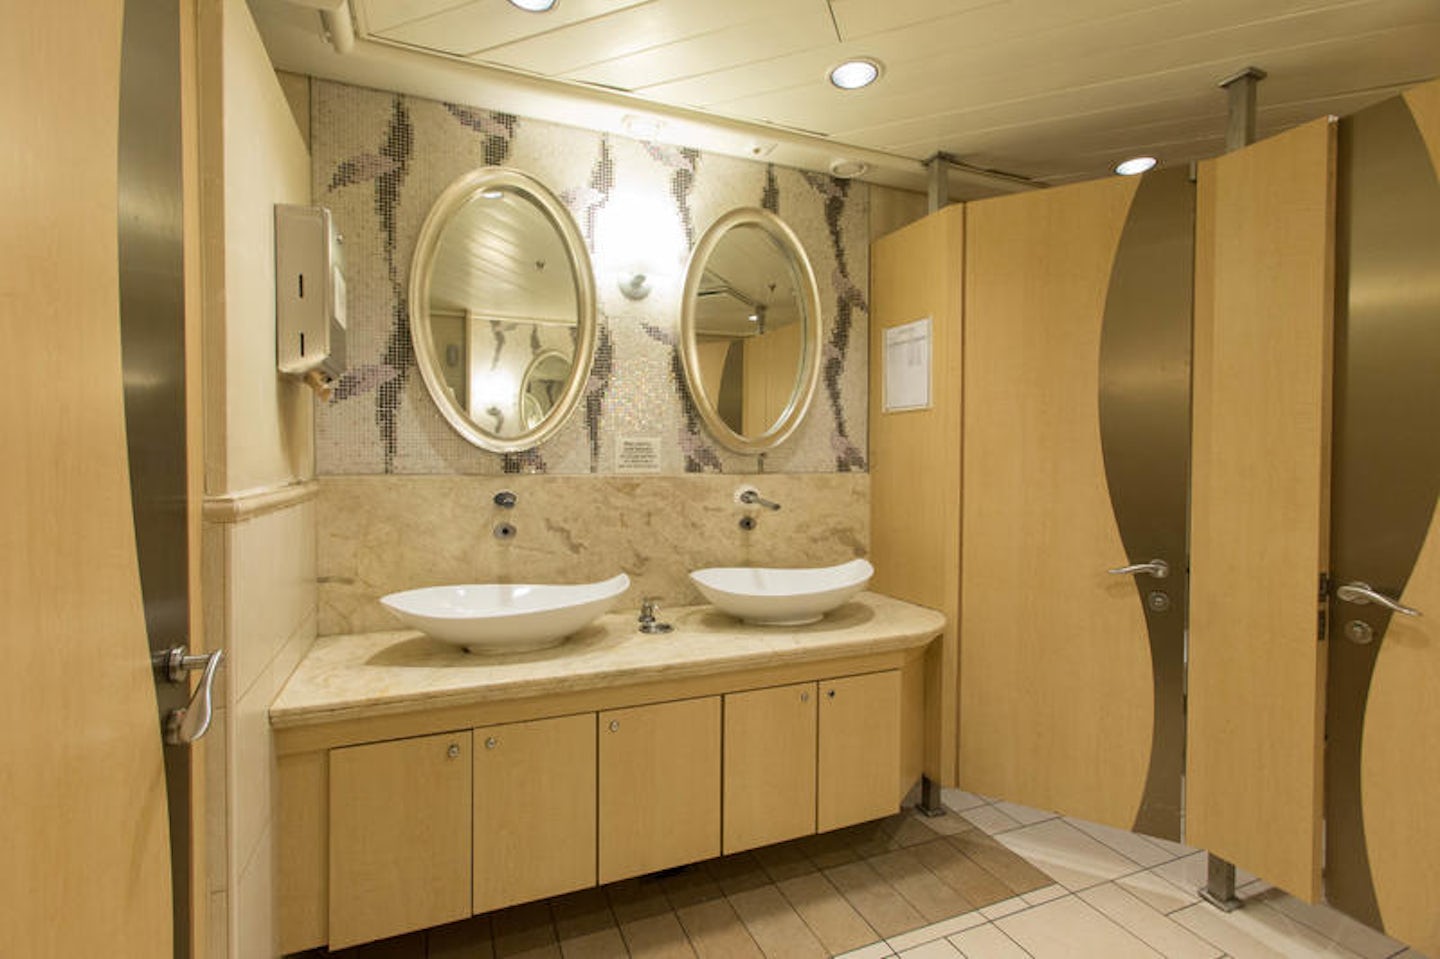 Bathrooms on Enchantment of the Seas